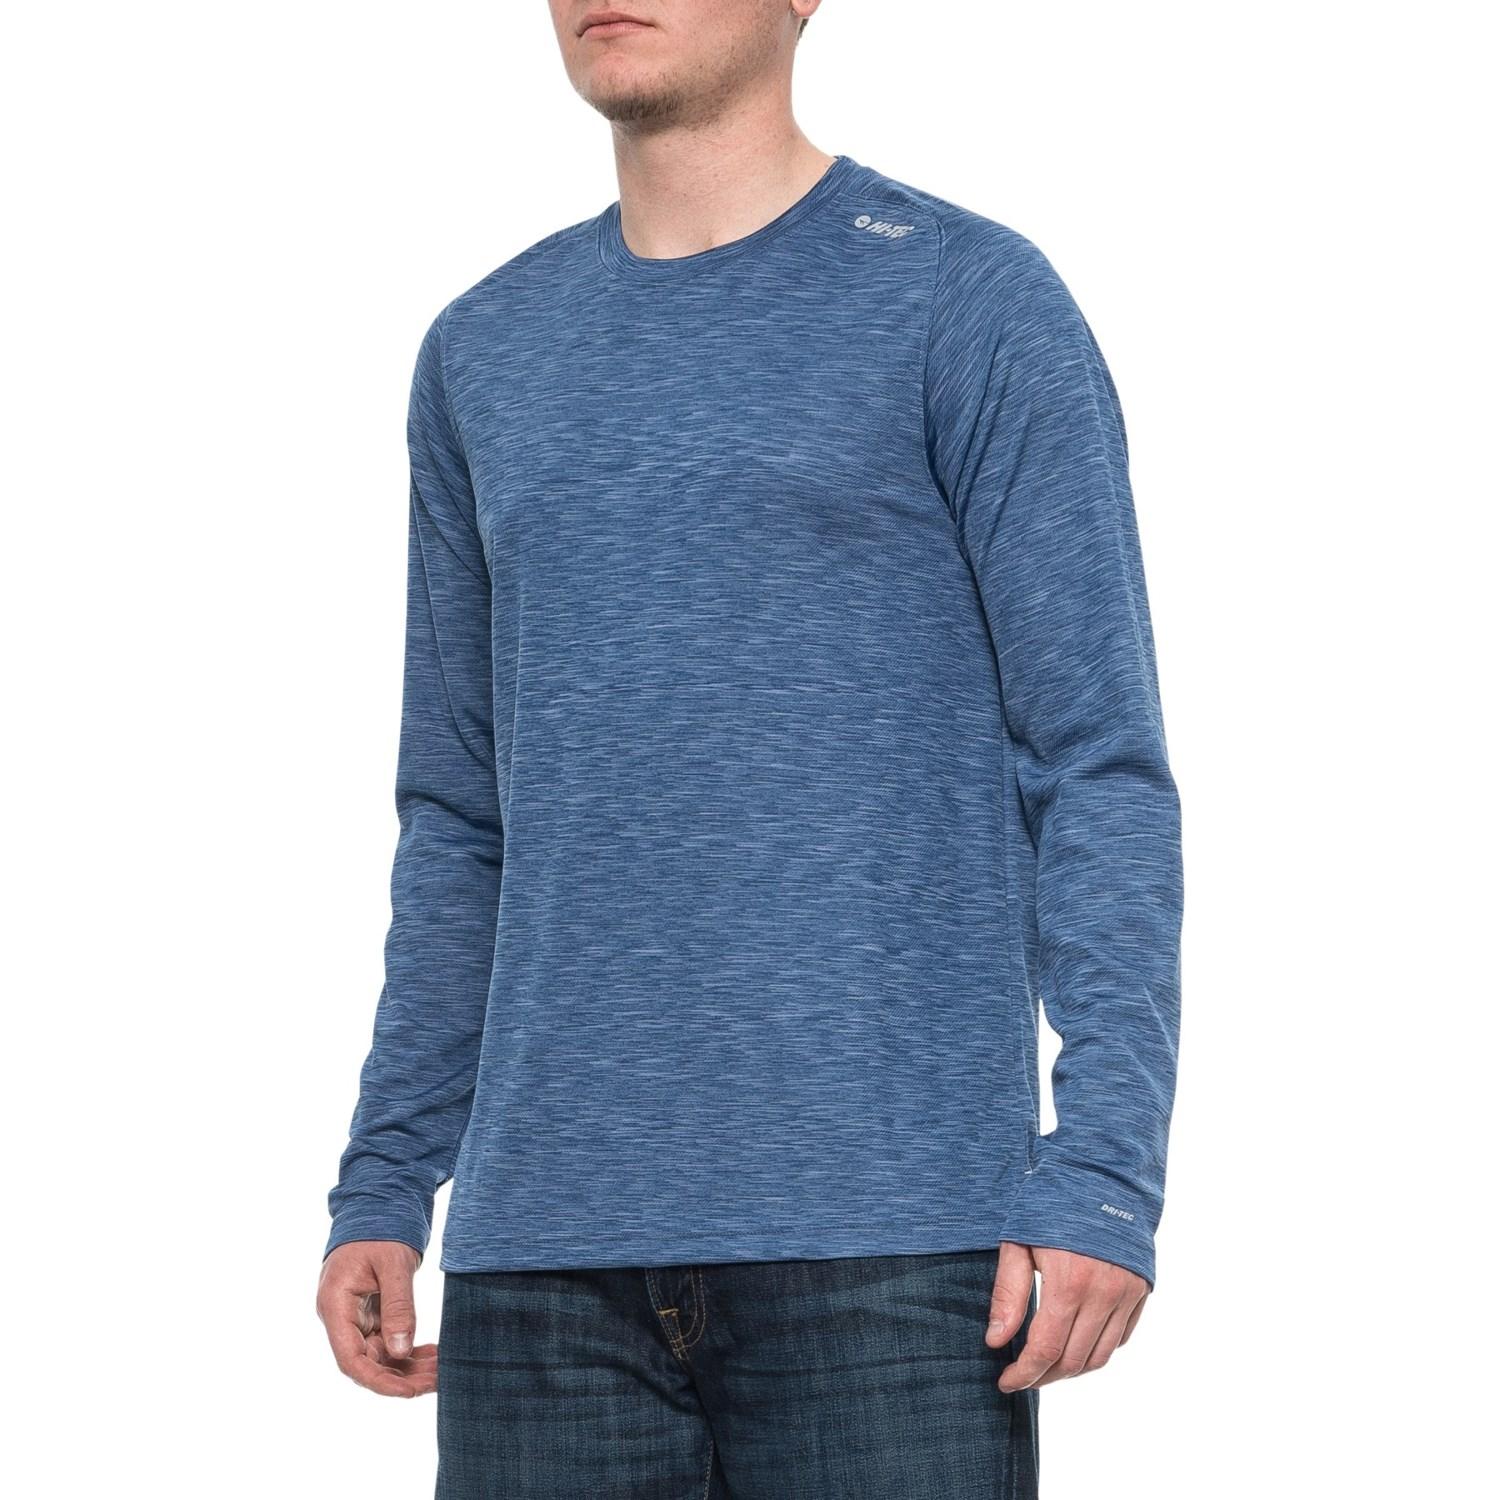 Hi-Tec Synthetic Coastal Clarke Space-dyed T-shirt in Blue for Men - Lyst